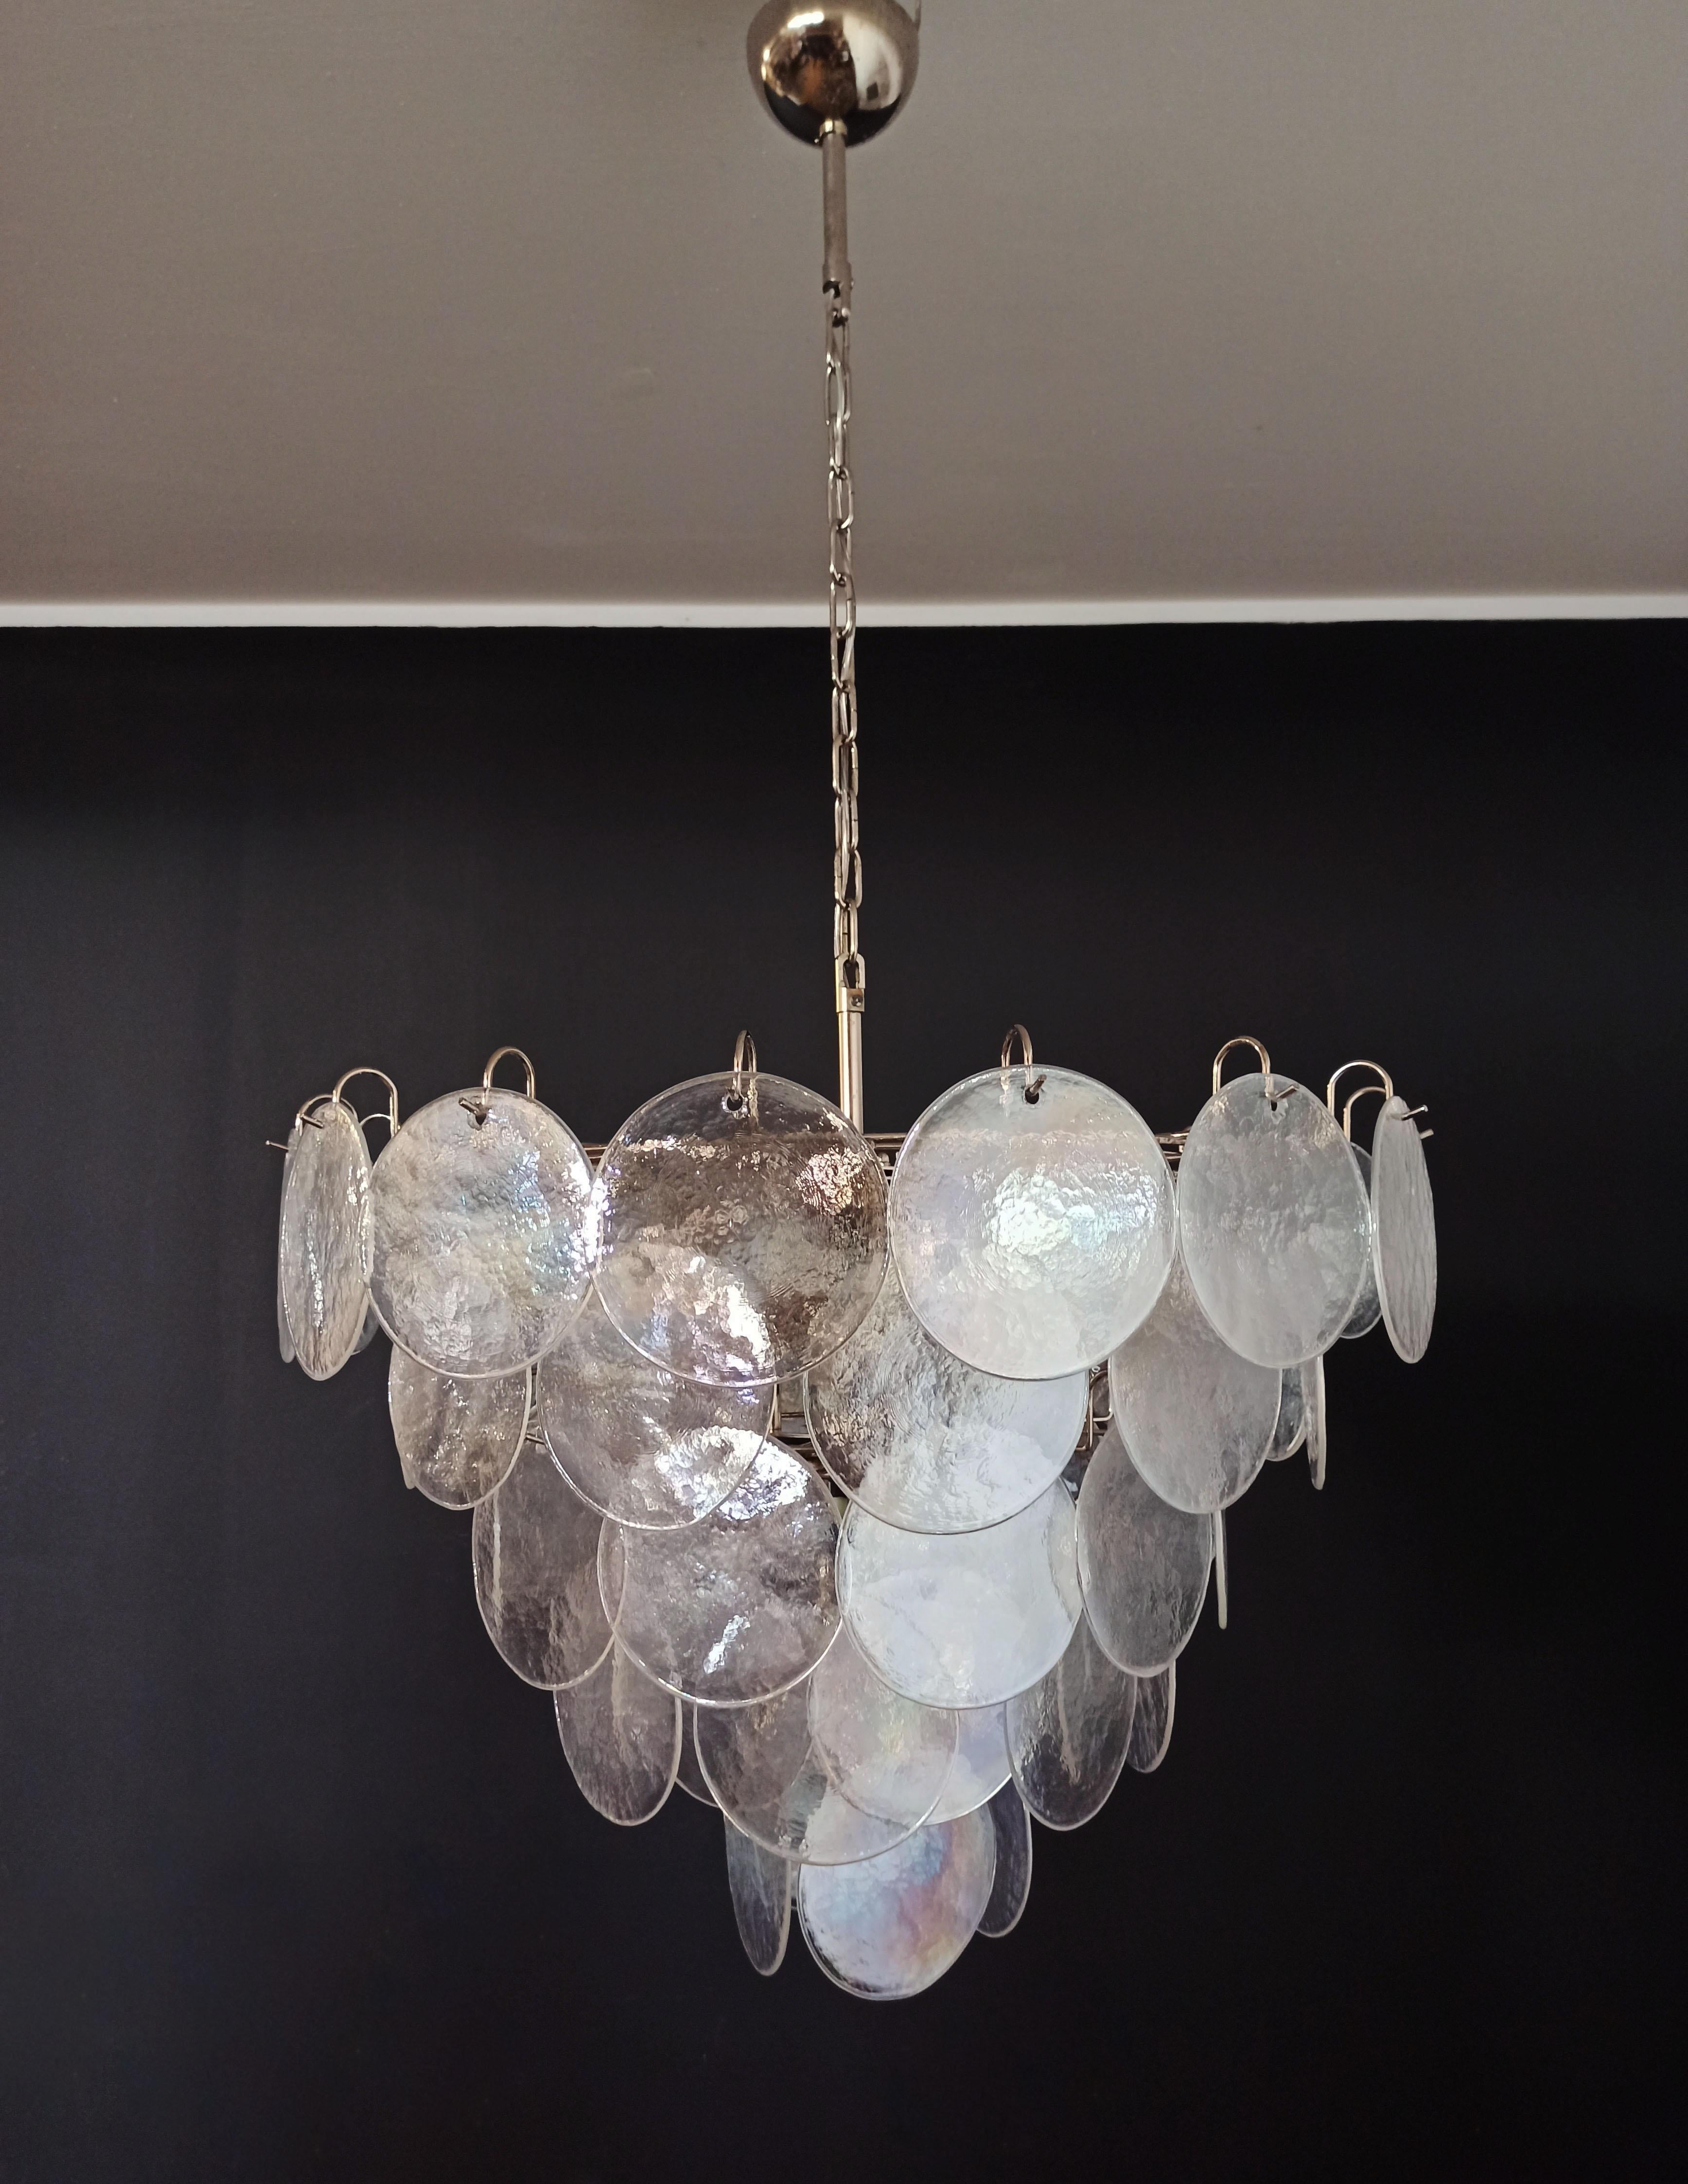 Italian Murano chandelier. The chandelier has 57 Murano iridescent glass disks. The glasses are now 
unavailable, they have the particularity of reflecting a multiplicity of colors, which makes the chandelier a true work of art. Nickel metal